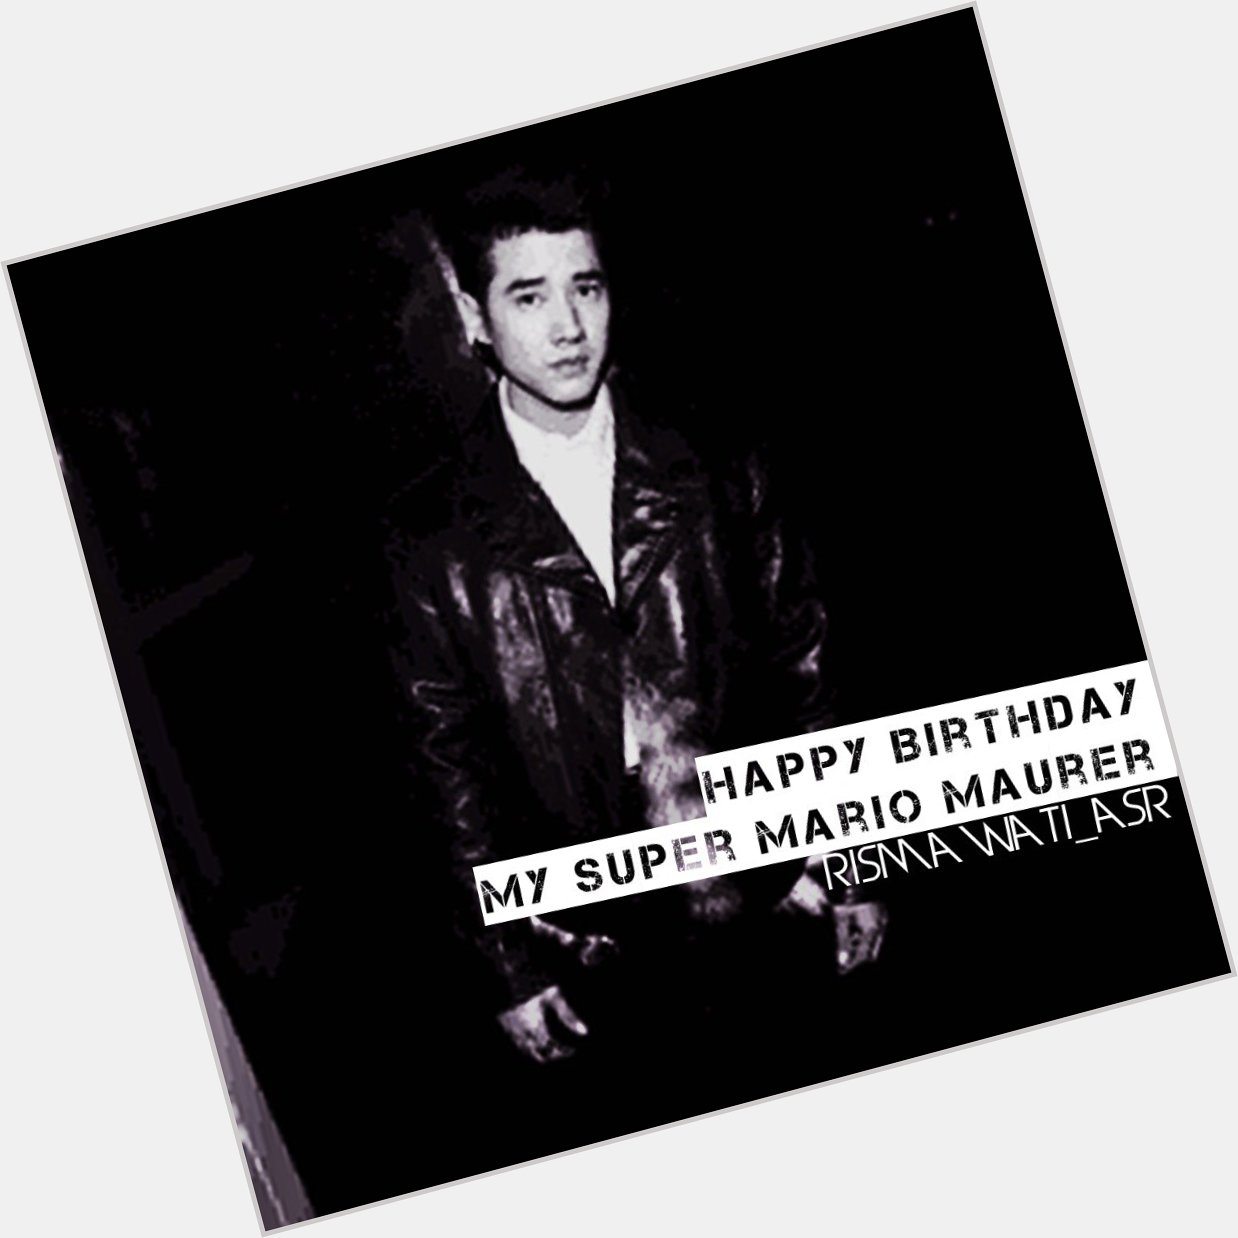  Happy Birthday mysuper Mario Maurer to 27th. Stay handsome, sexy and hot yah! 